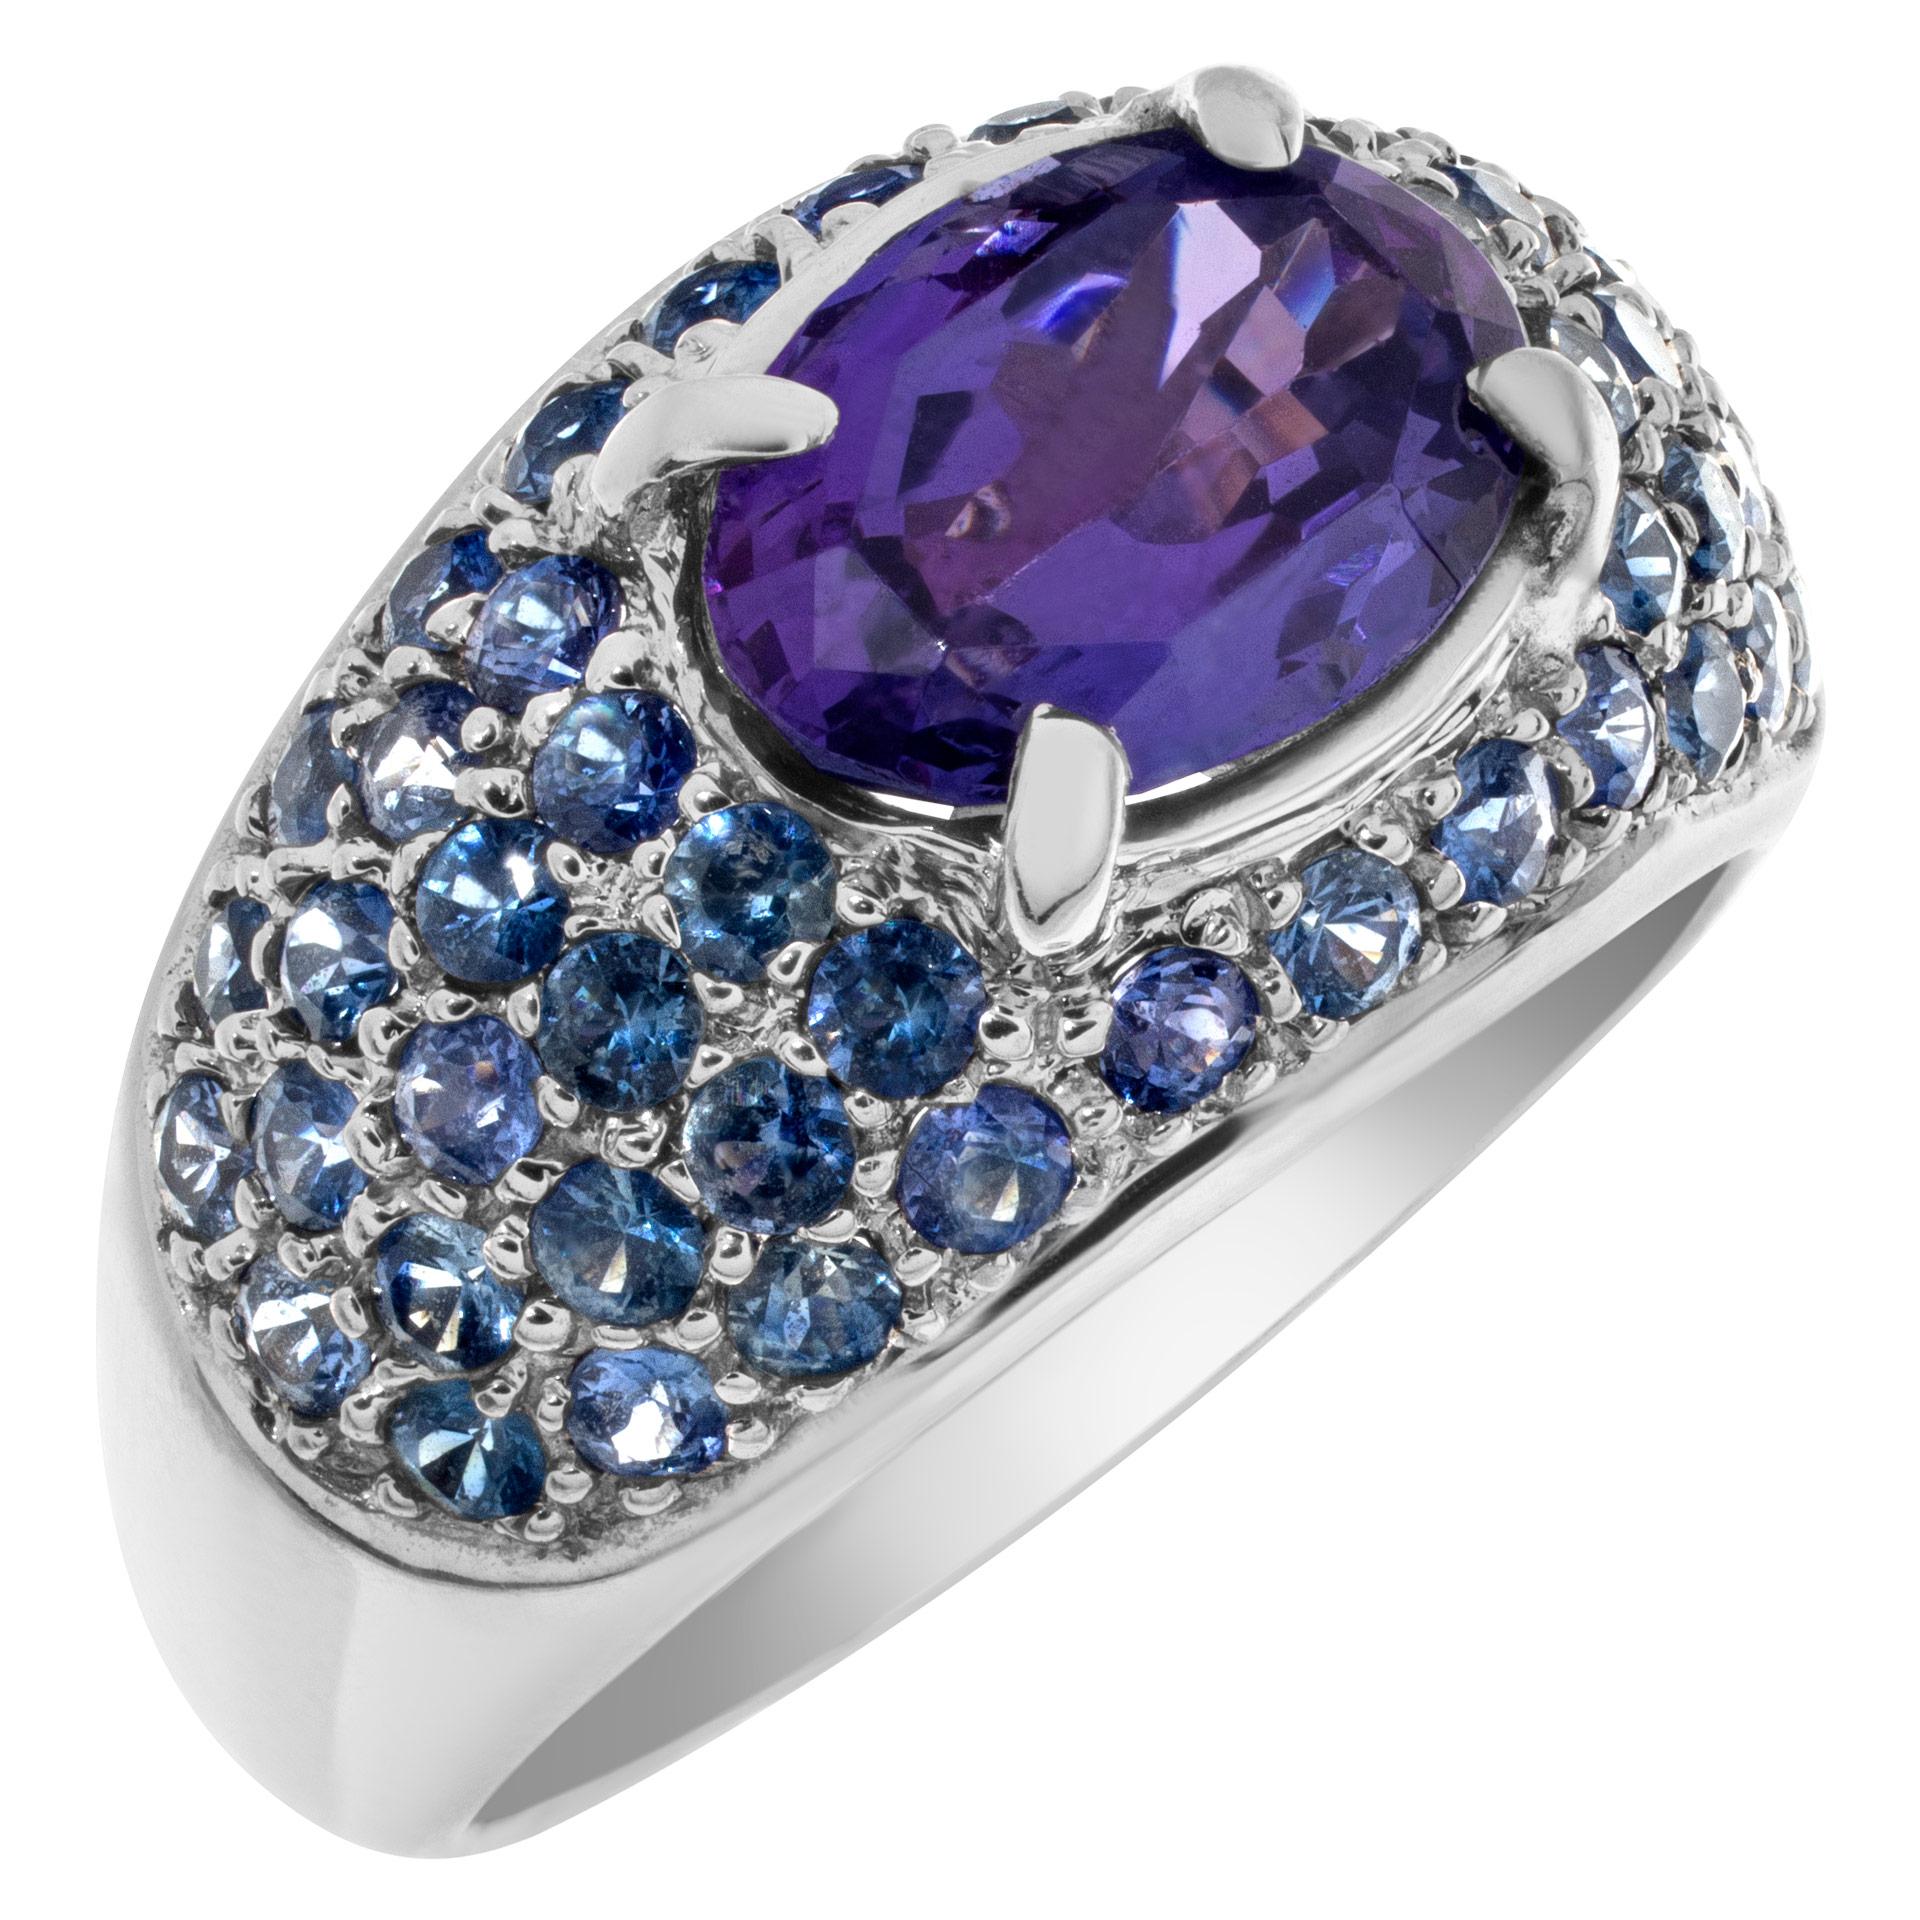 Bright oval center (approximately 2 carats) tanzanite surrounded by sparkling pave tanzanite gems in 14k white gold. Size 8.5.This Tanzanite ring is currently size 8.5 and some items can be sized up or down, please ask! It weighs 5.7 pennyweights